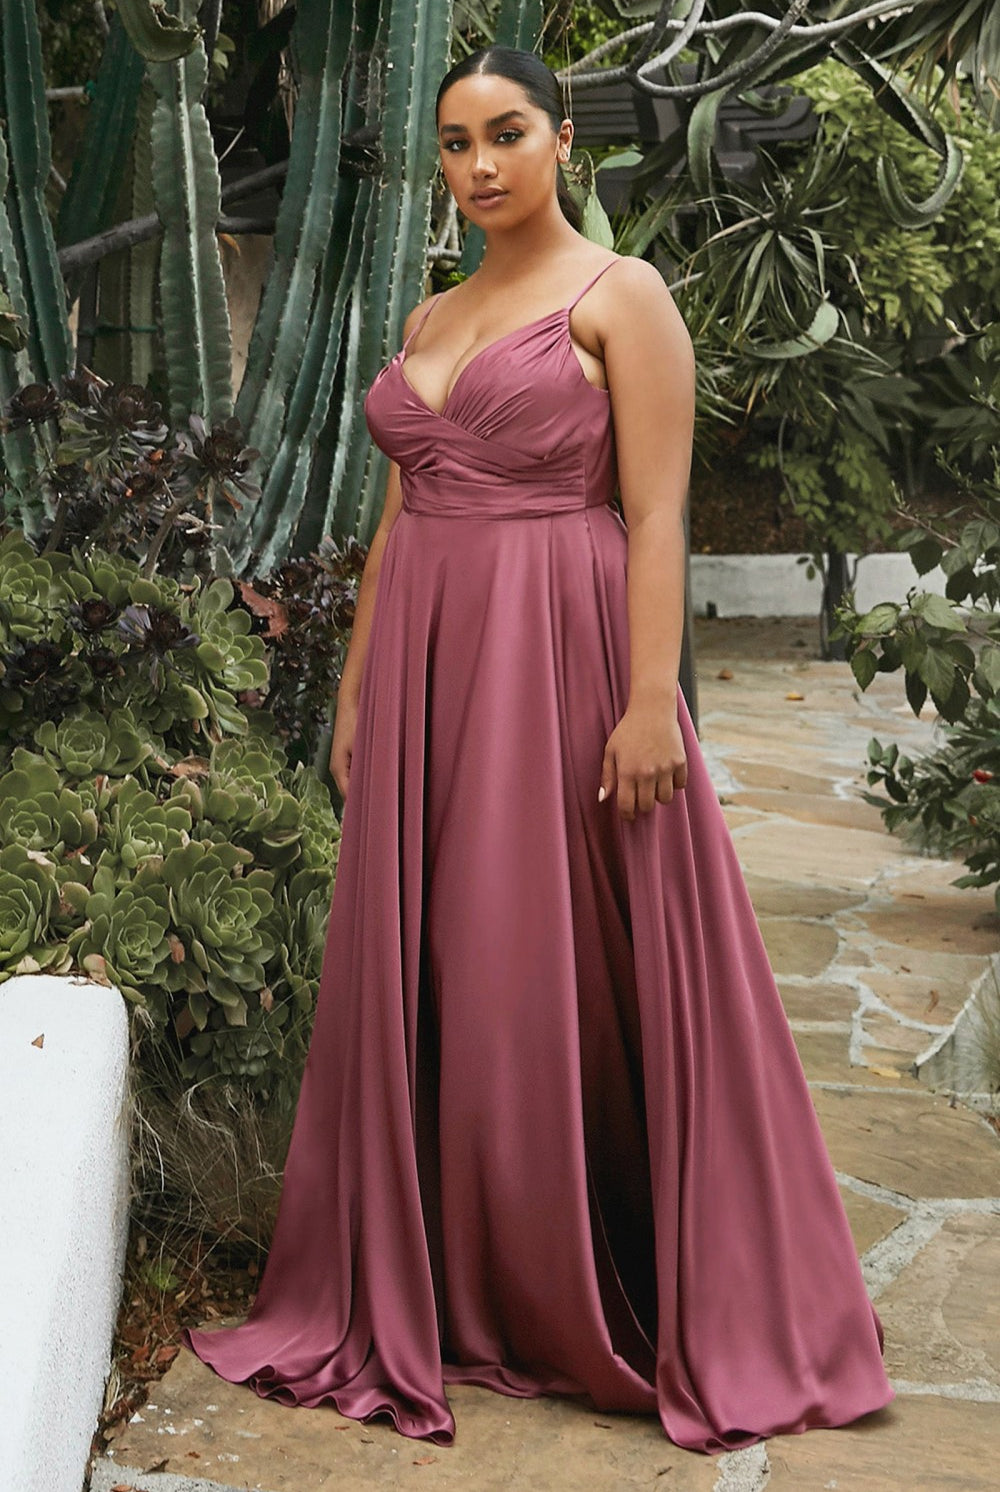 Bridesmaid Dresses with Deep V-Neck, Wrapped Bodice, and High Leg Slit-smcdress